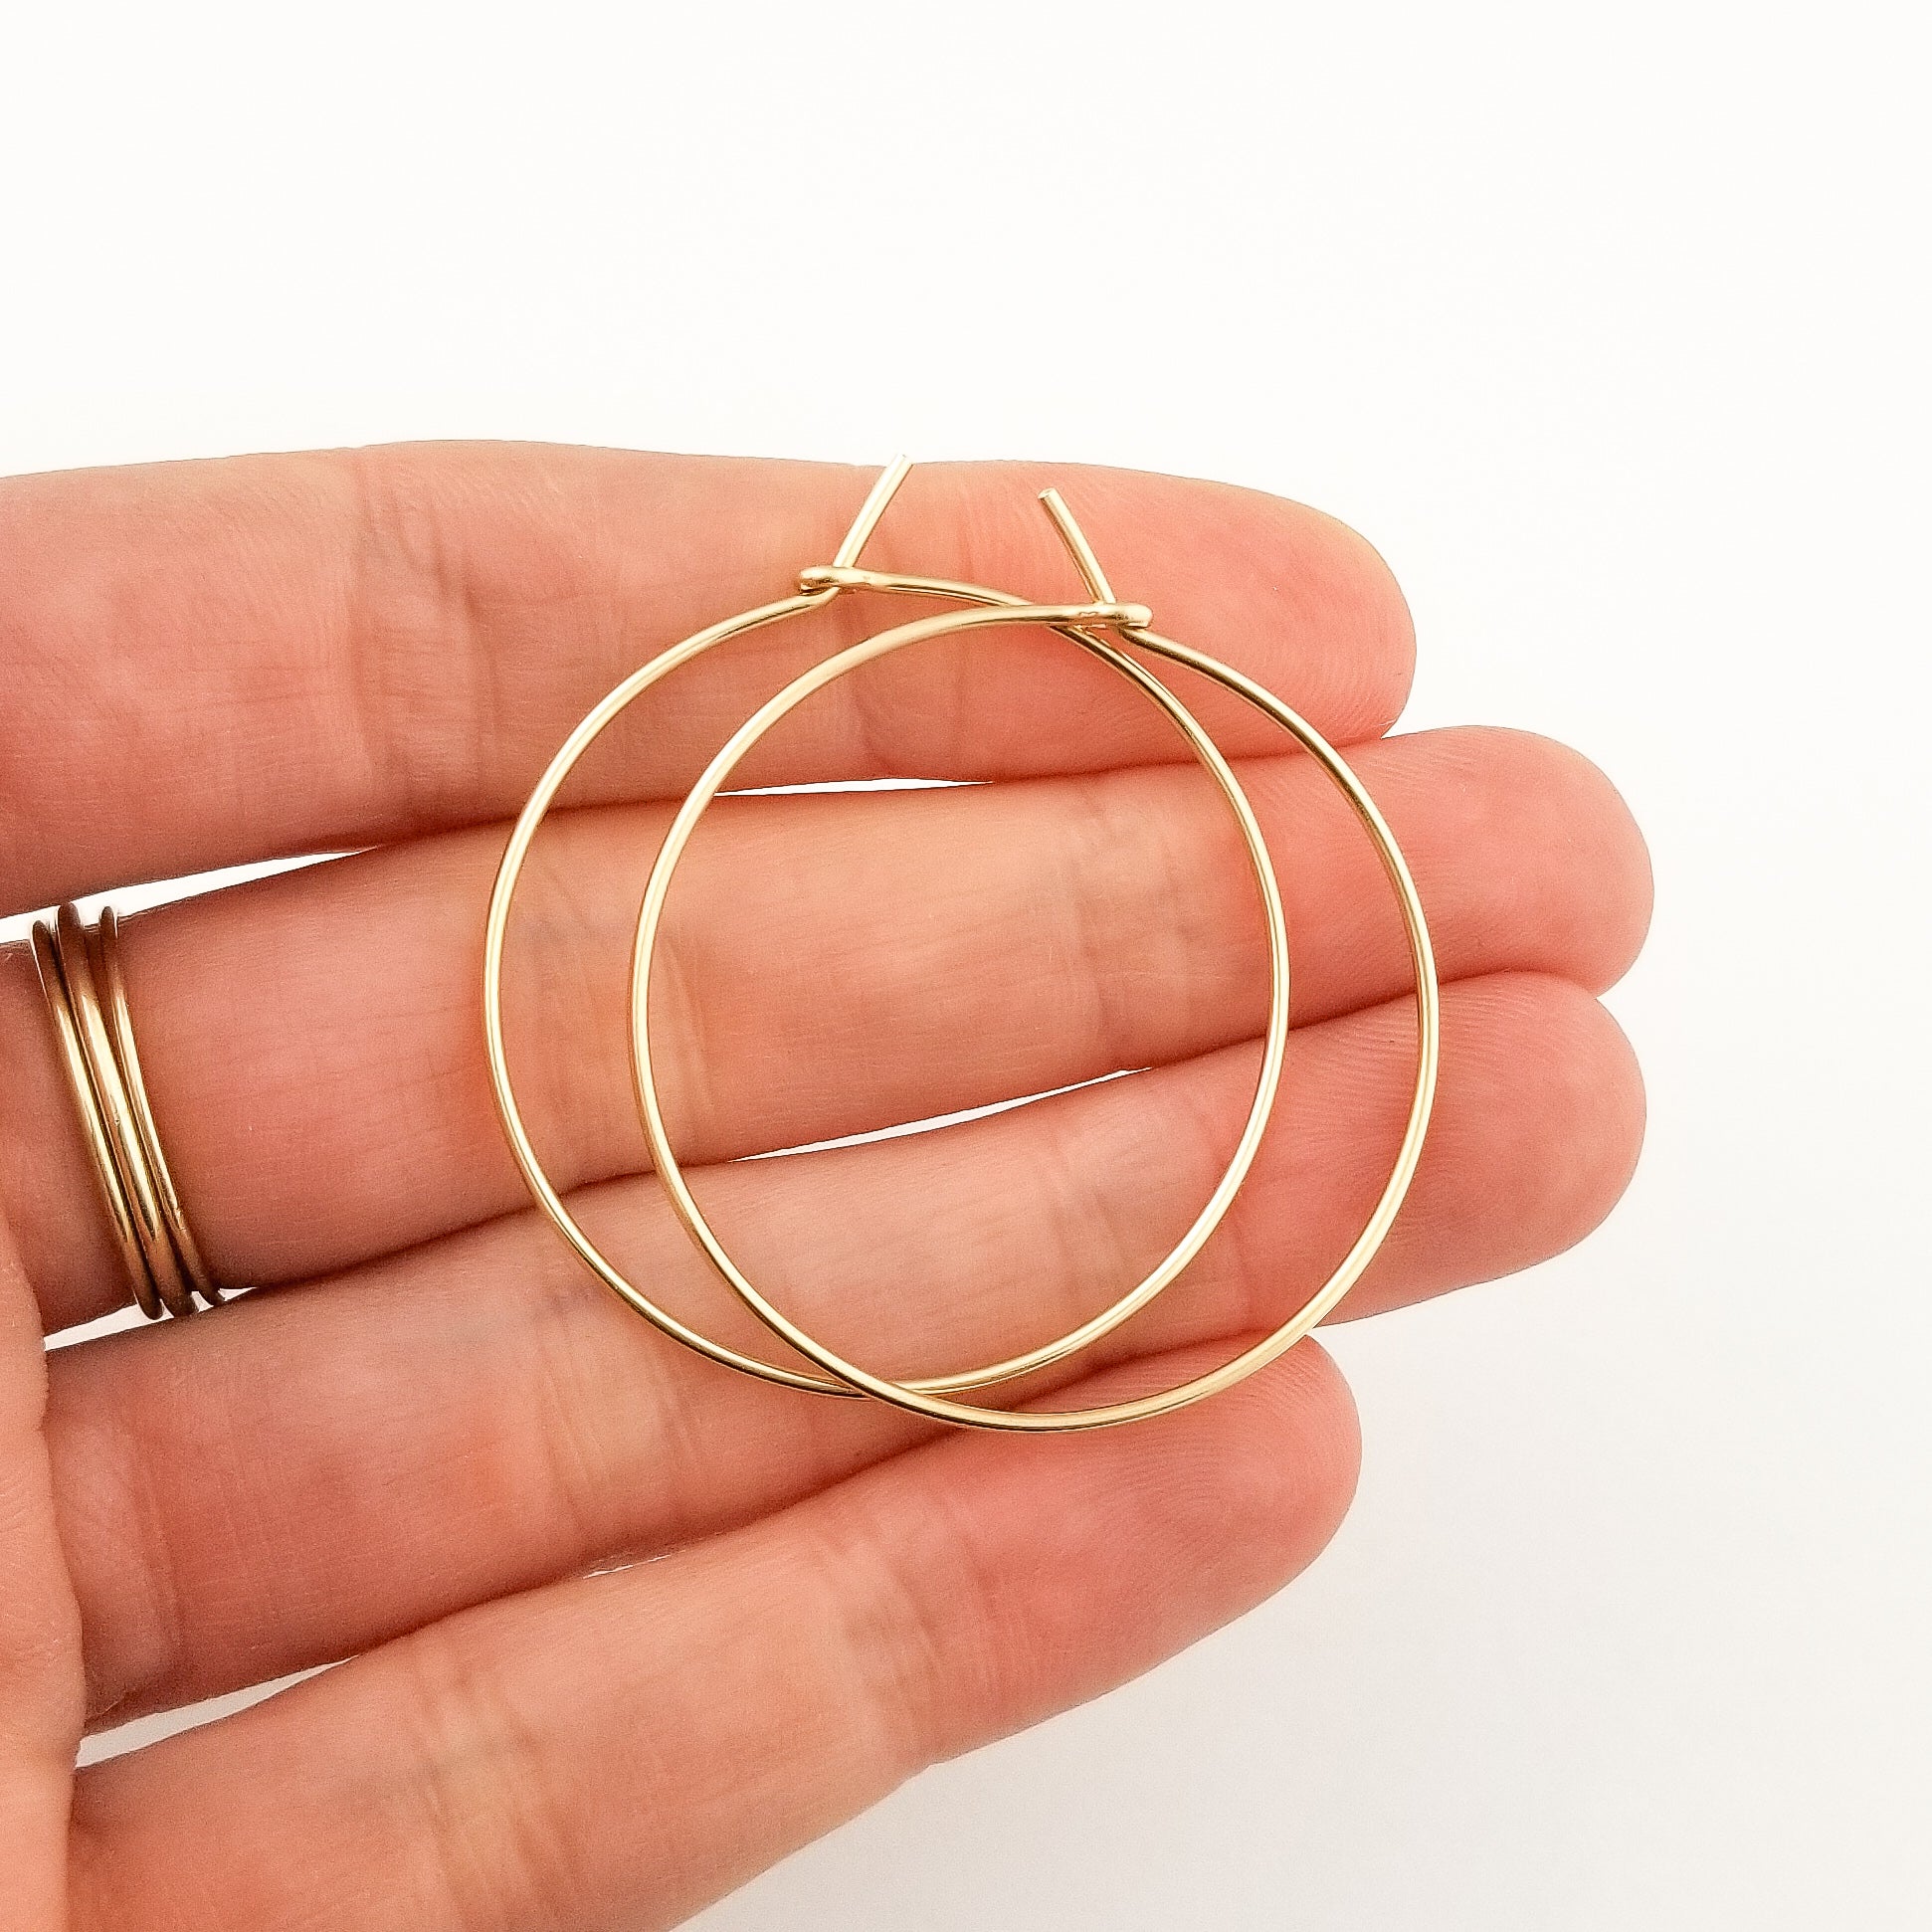 Gold Hoop Earrings in Solid Yellow 14 Karat Gold Thick Classic Style on Black Rock